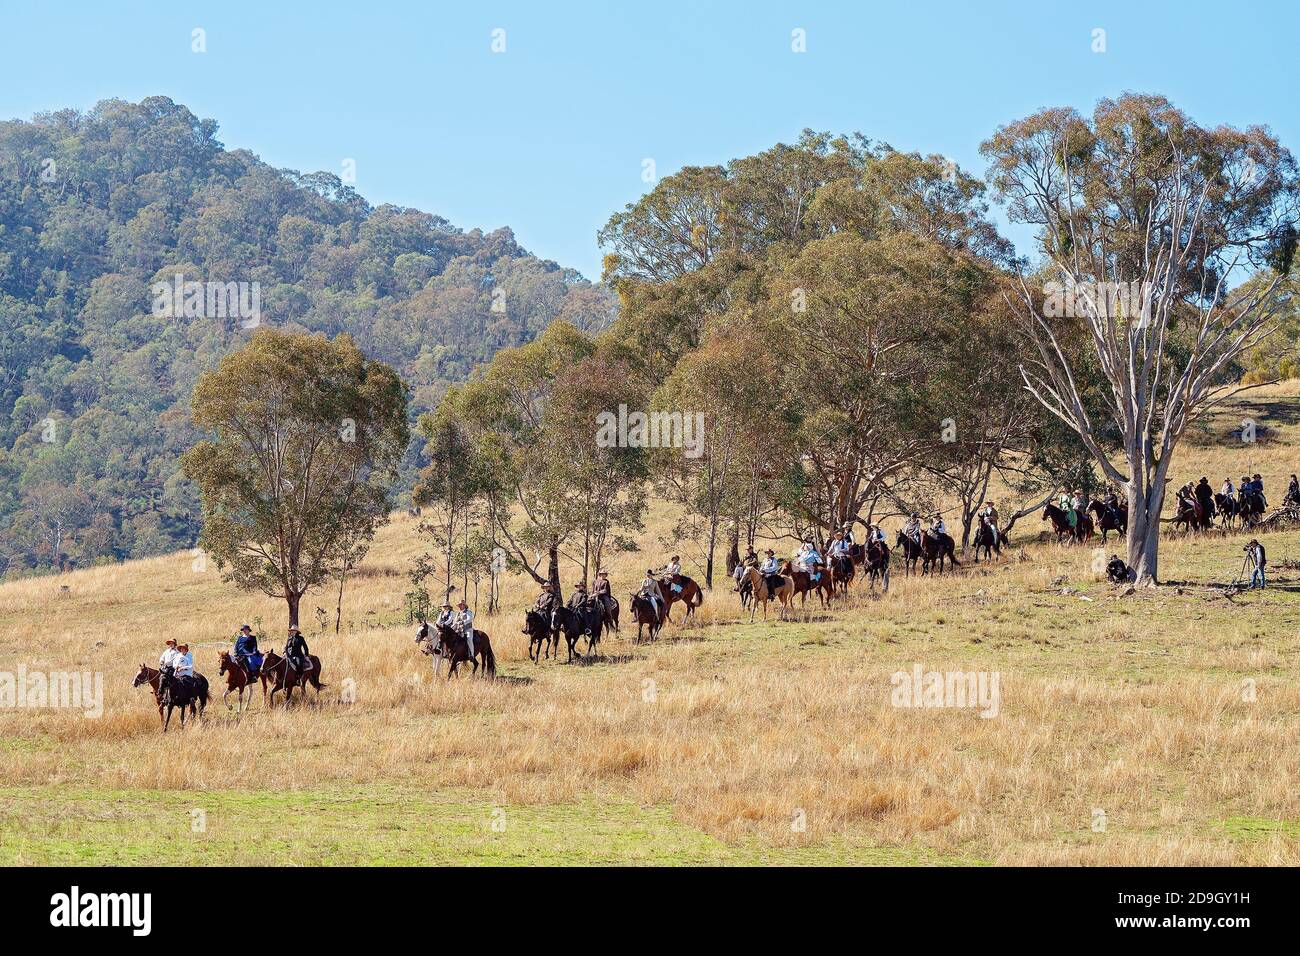 CORRYONG, VICTORIA, AUSTRALIA - APRIL 5TH 2019: The Man From Snowy River Bush Festival re-enactment, riders on horseback come down from out of the bus Stock Photo